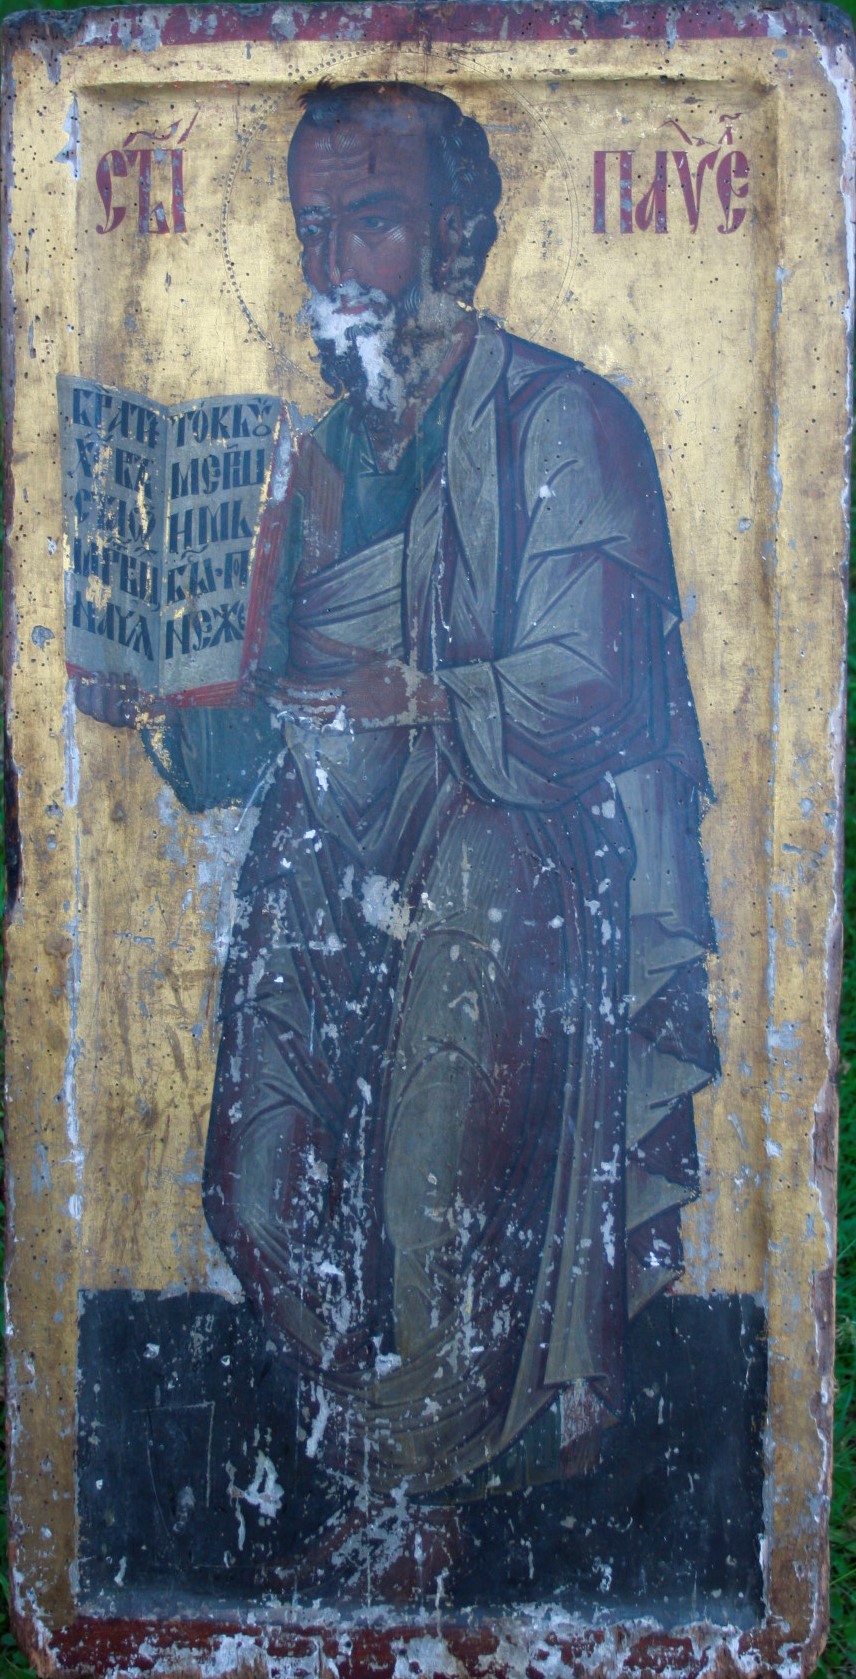 Apostle Paul, icon from a Deësis iconostasis row, second quarter of 16th century, Peri former hermitage, Vâlcea county  (source: D. Constantinescu)